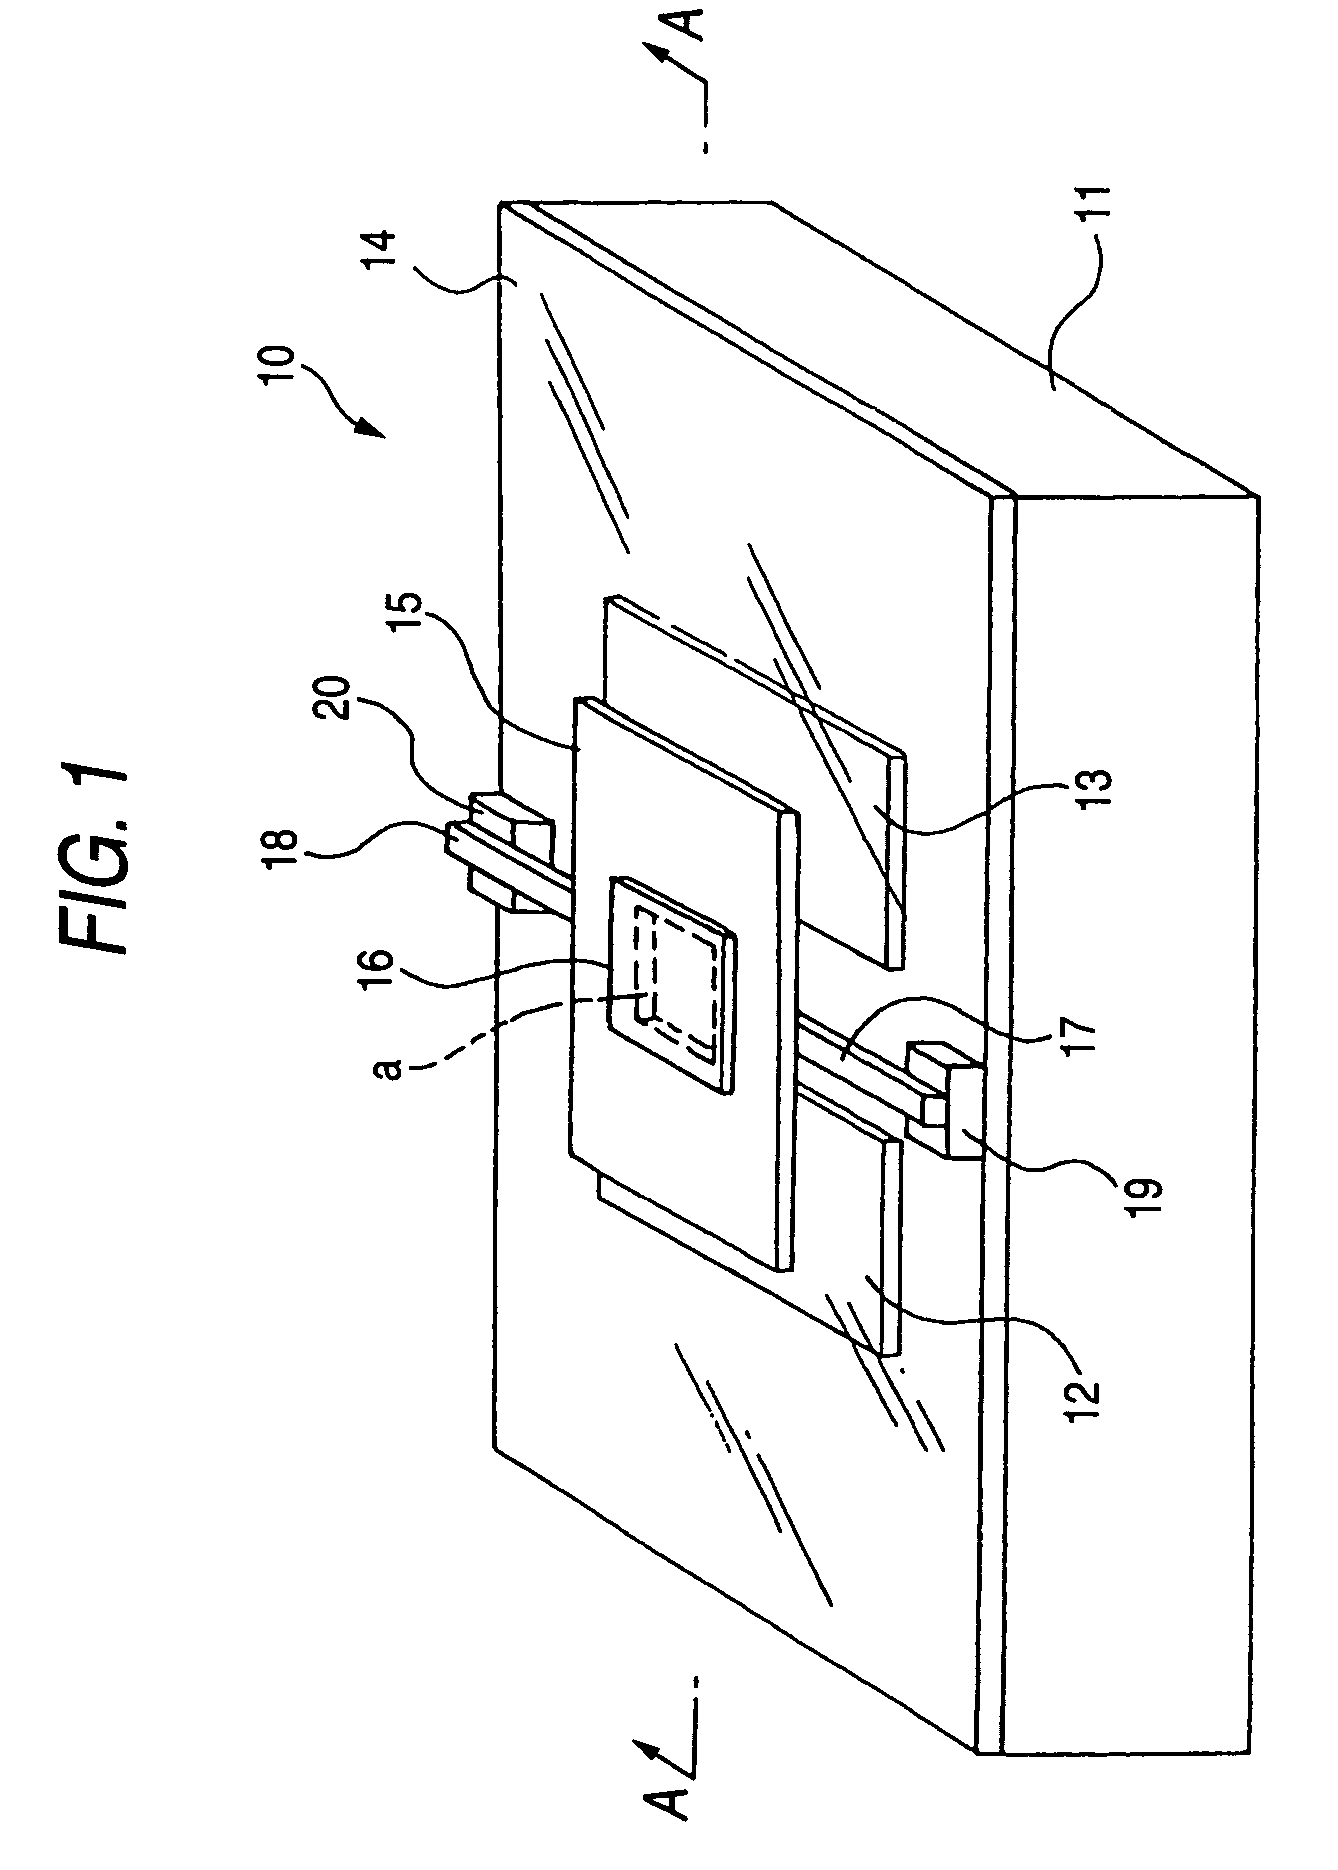 Spatial light modulator, spatial light modulator array, and image formation apparatus